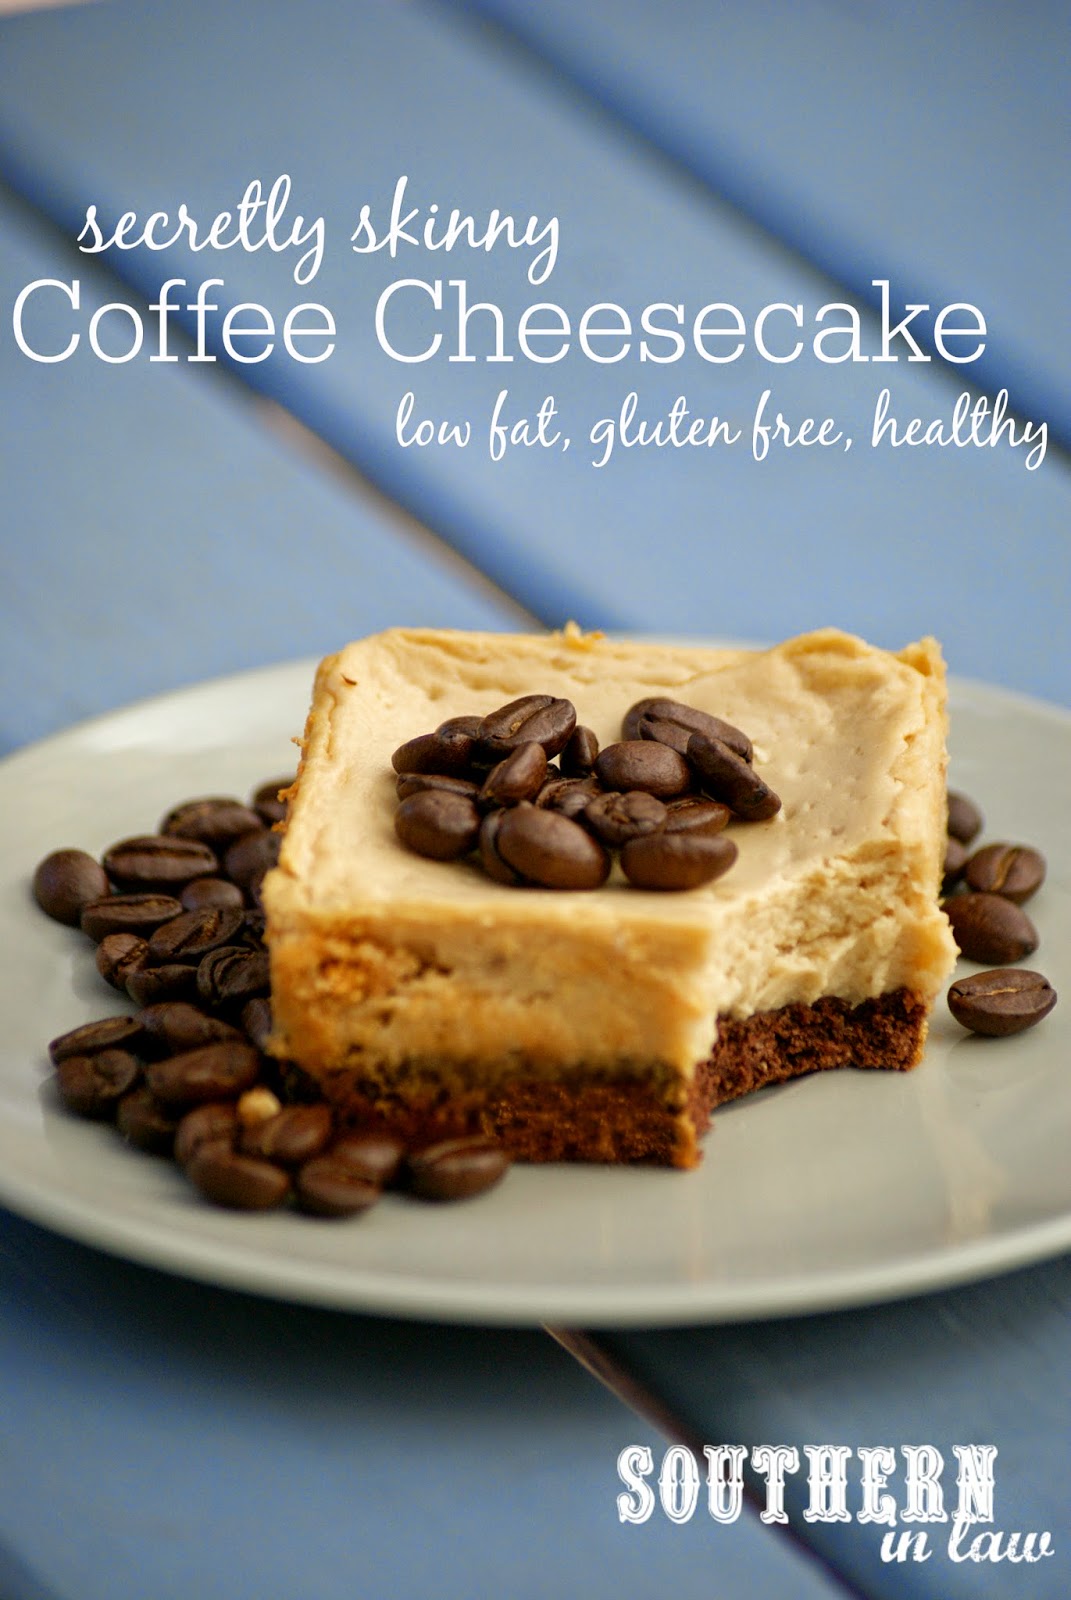 Secretly Skinny Coffee Cheesecake with a Chocolate Cookie Crust Recipe - low fat, gluten free, low sugar, high protein